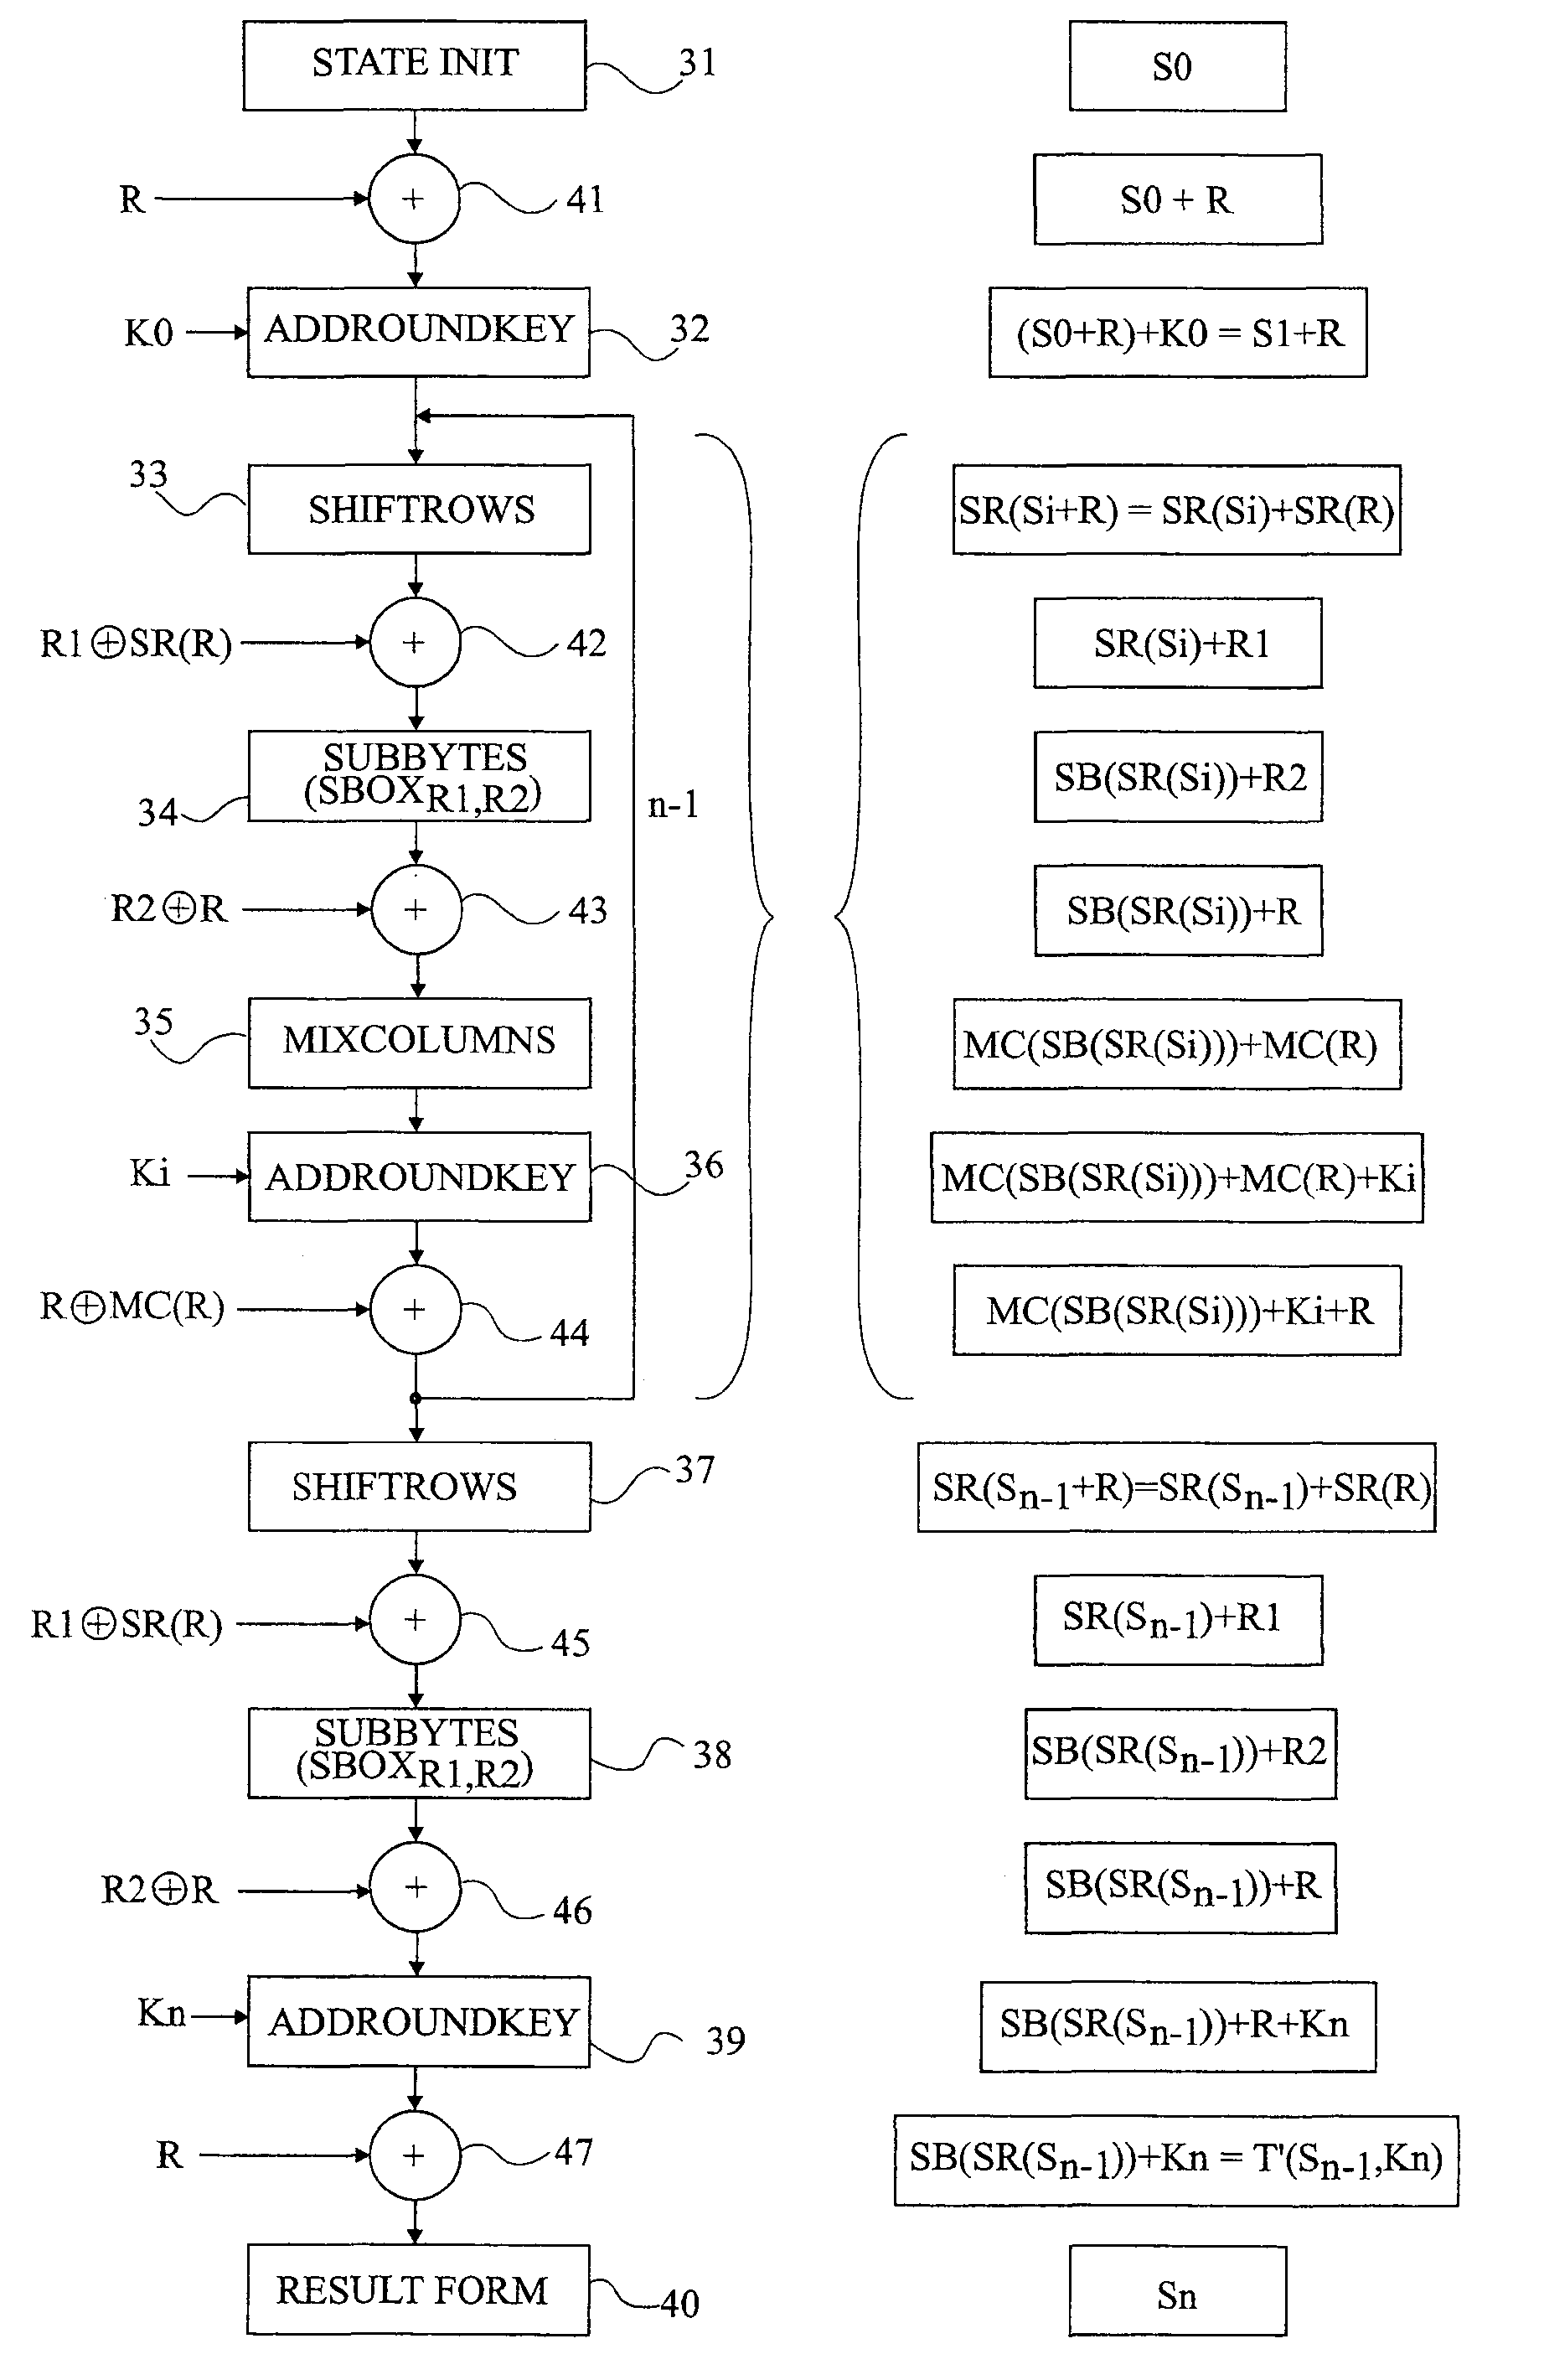 Cyphering/decyphering performed by an integrated circuit